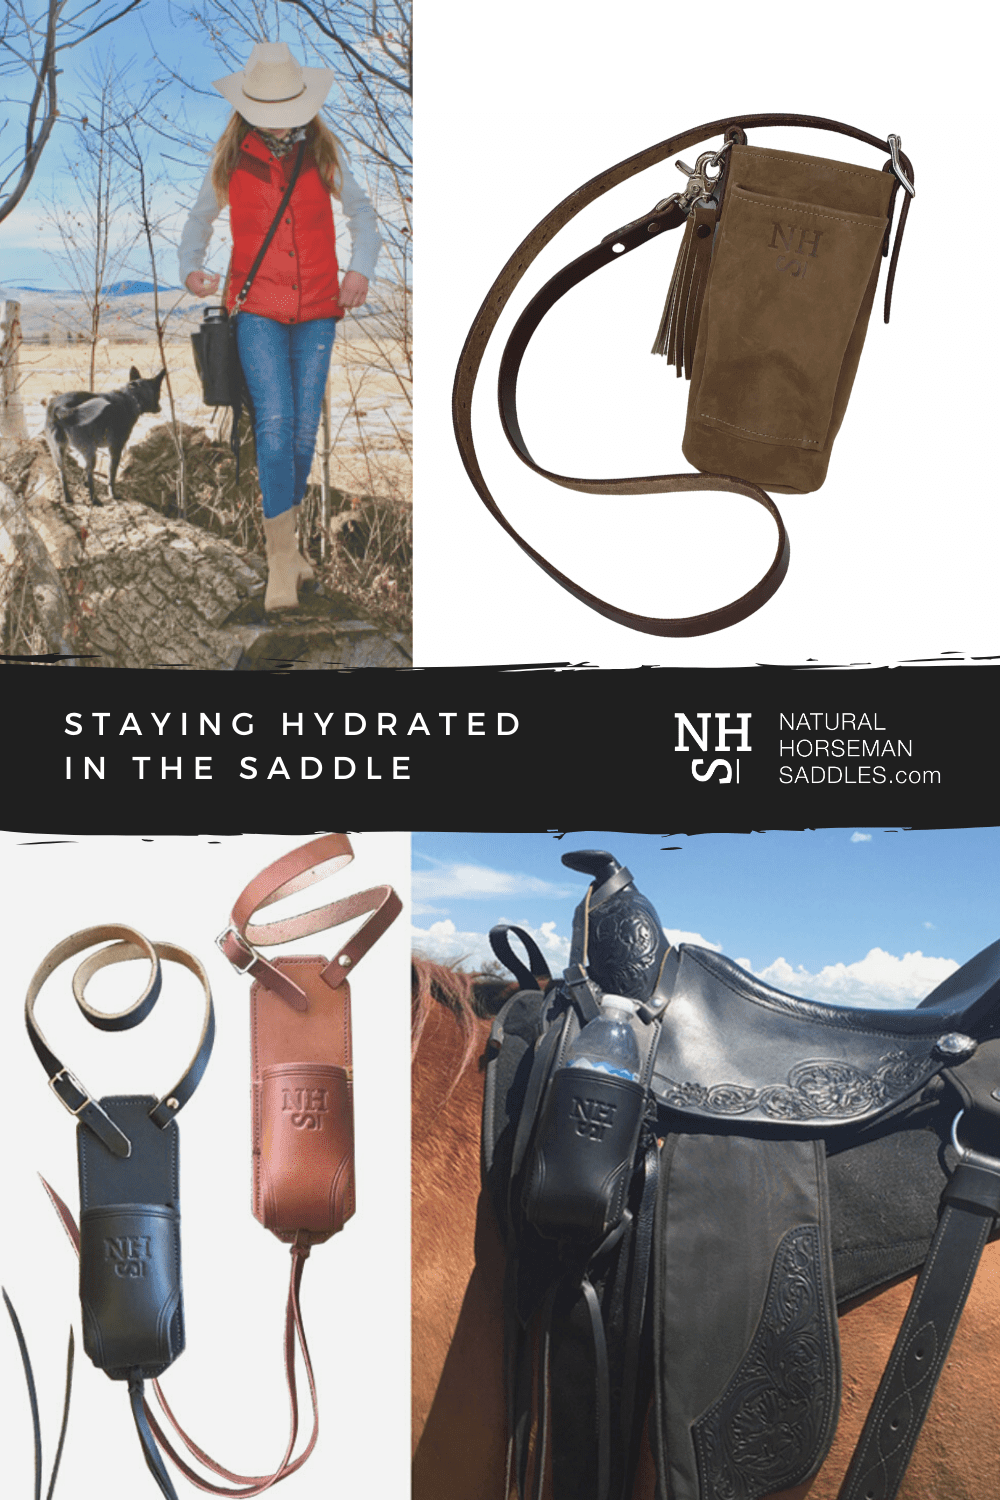 The leather hydration holster and leather water bottle holder for your saddle or persons.